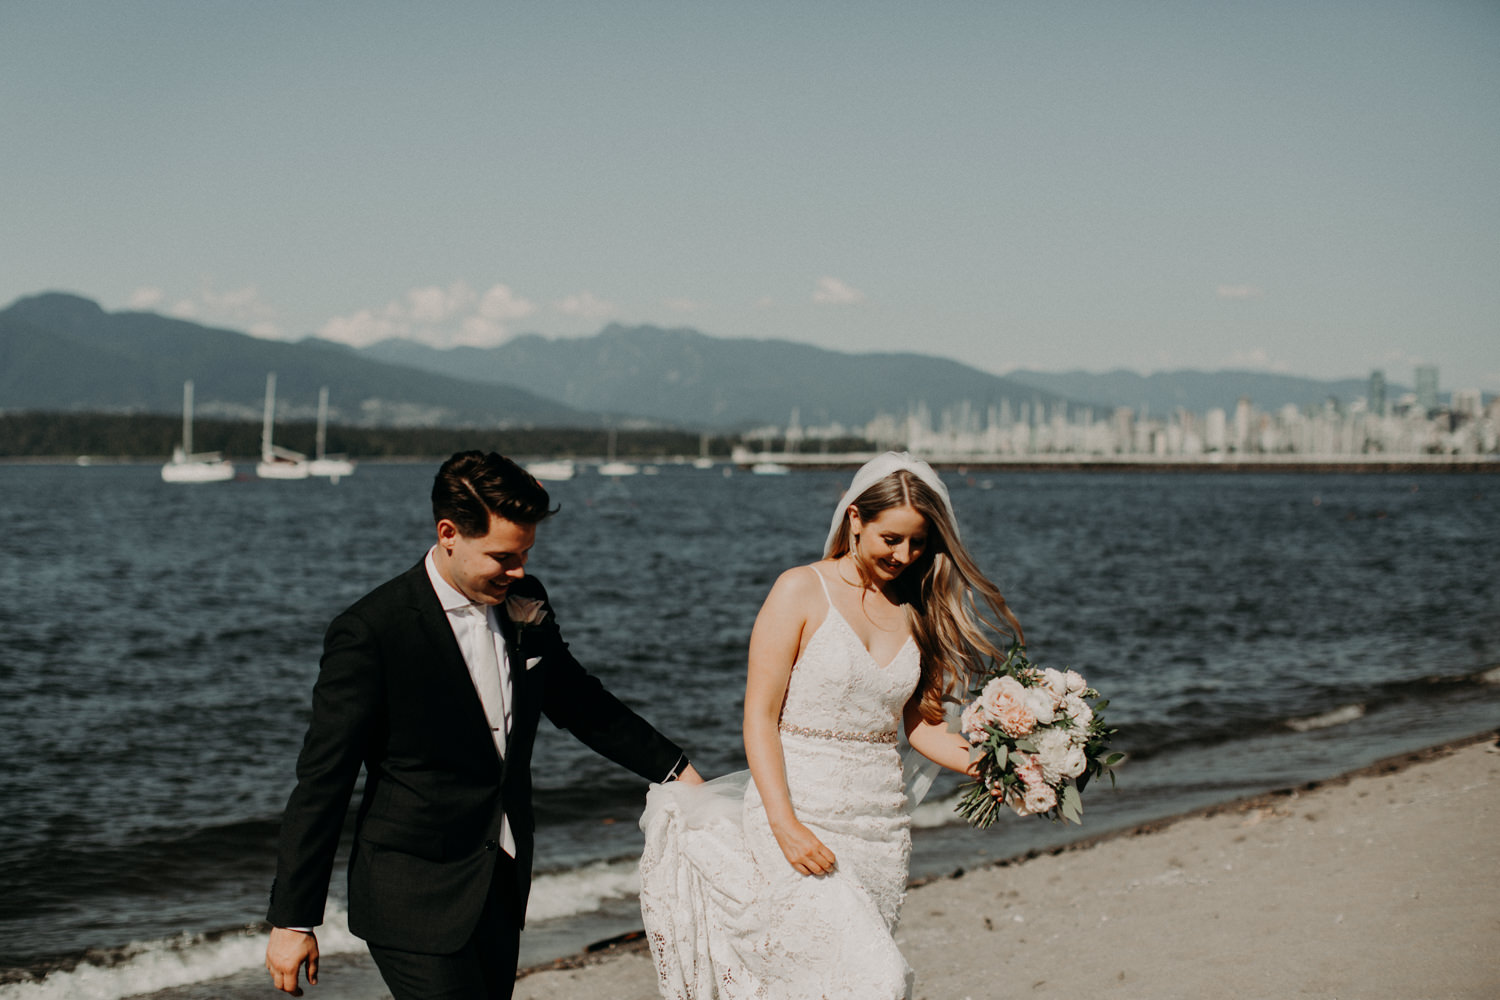 The bride and groom walk on the sand by the water at Jericho Beach in Vancouver, BC.